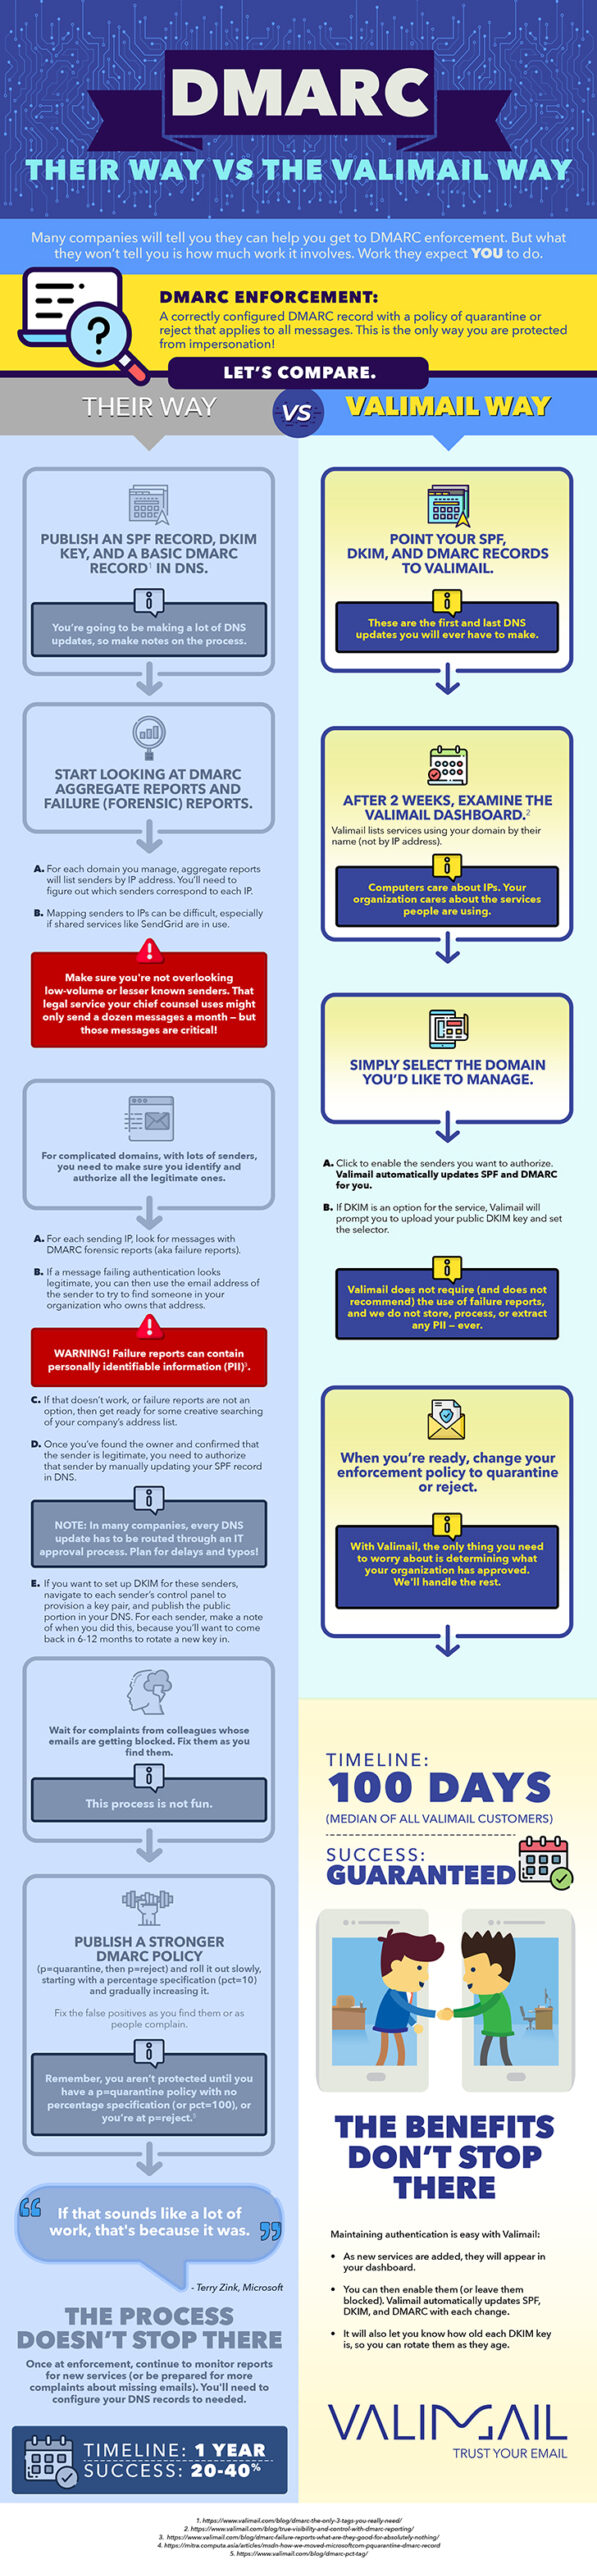 Infographic describing the many steps to DMARC enforcement